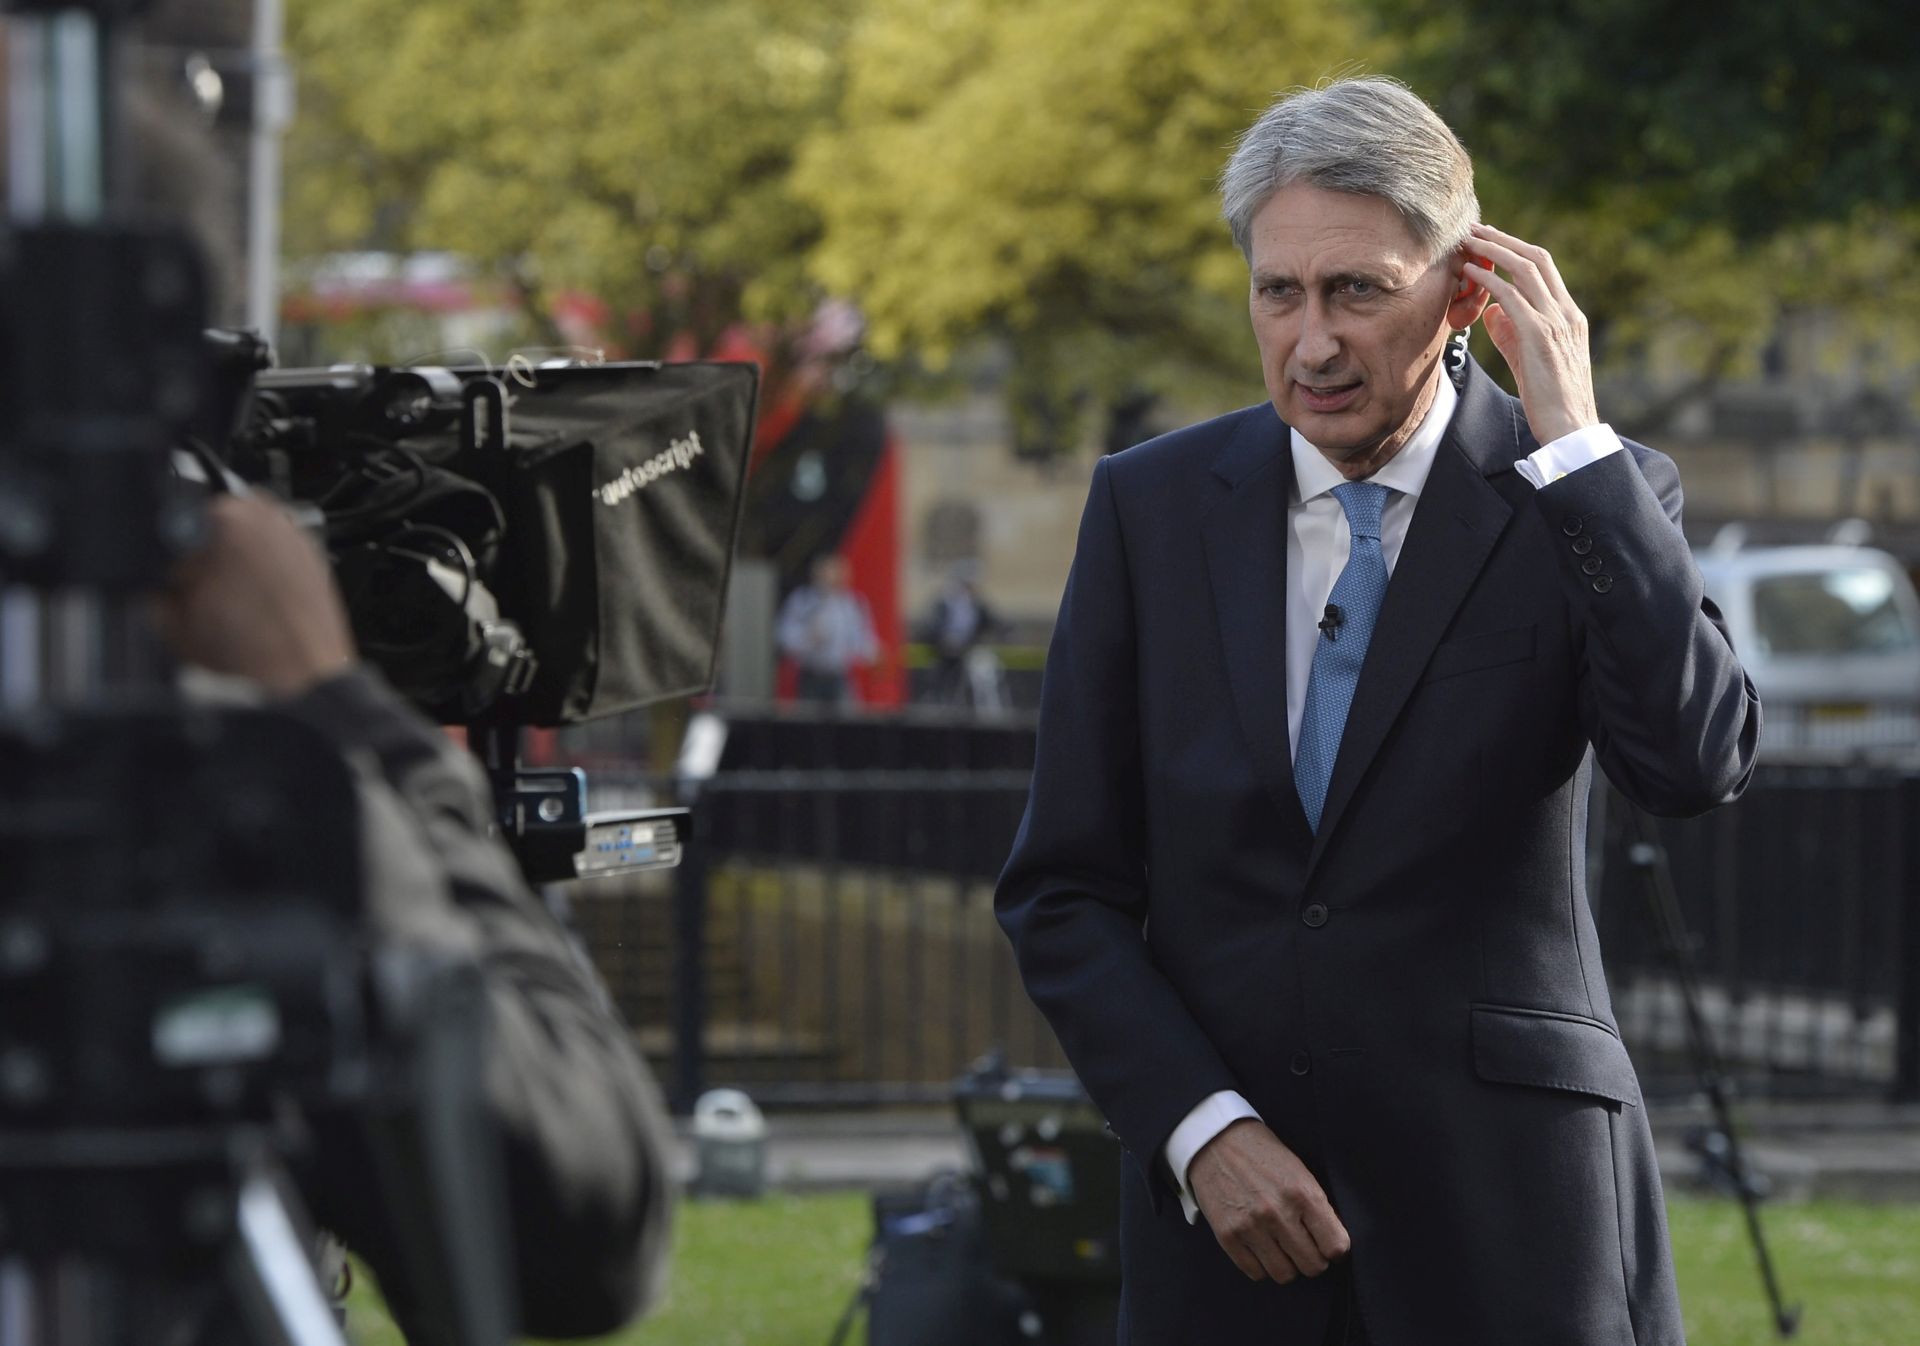 epa05387181 British Foreign Secretary Philip Hammond speaks to media outside the Houses of Parliament in central London, Britain, 24 June 2016. Britons in a referendum on 23 June have voted by a narrow margin to leave the European Union (EU). Media reports on early 24 June indicate that 51.9 per cent voted in favour of leaving the EU while 48.1 per cent voted for remaining in.  EPA/HANNAH MCKAY